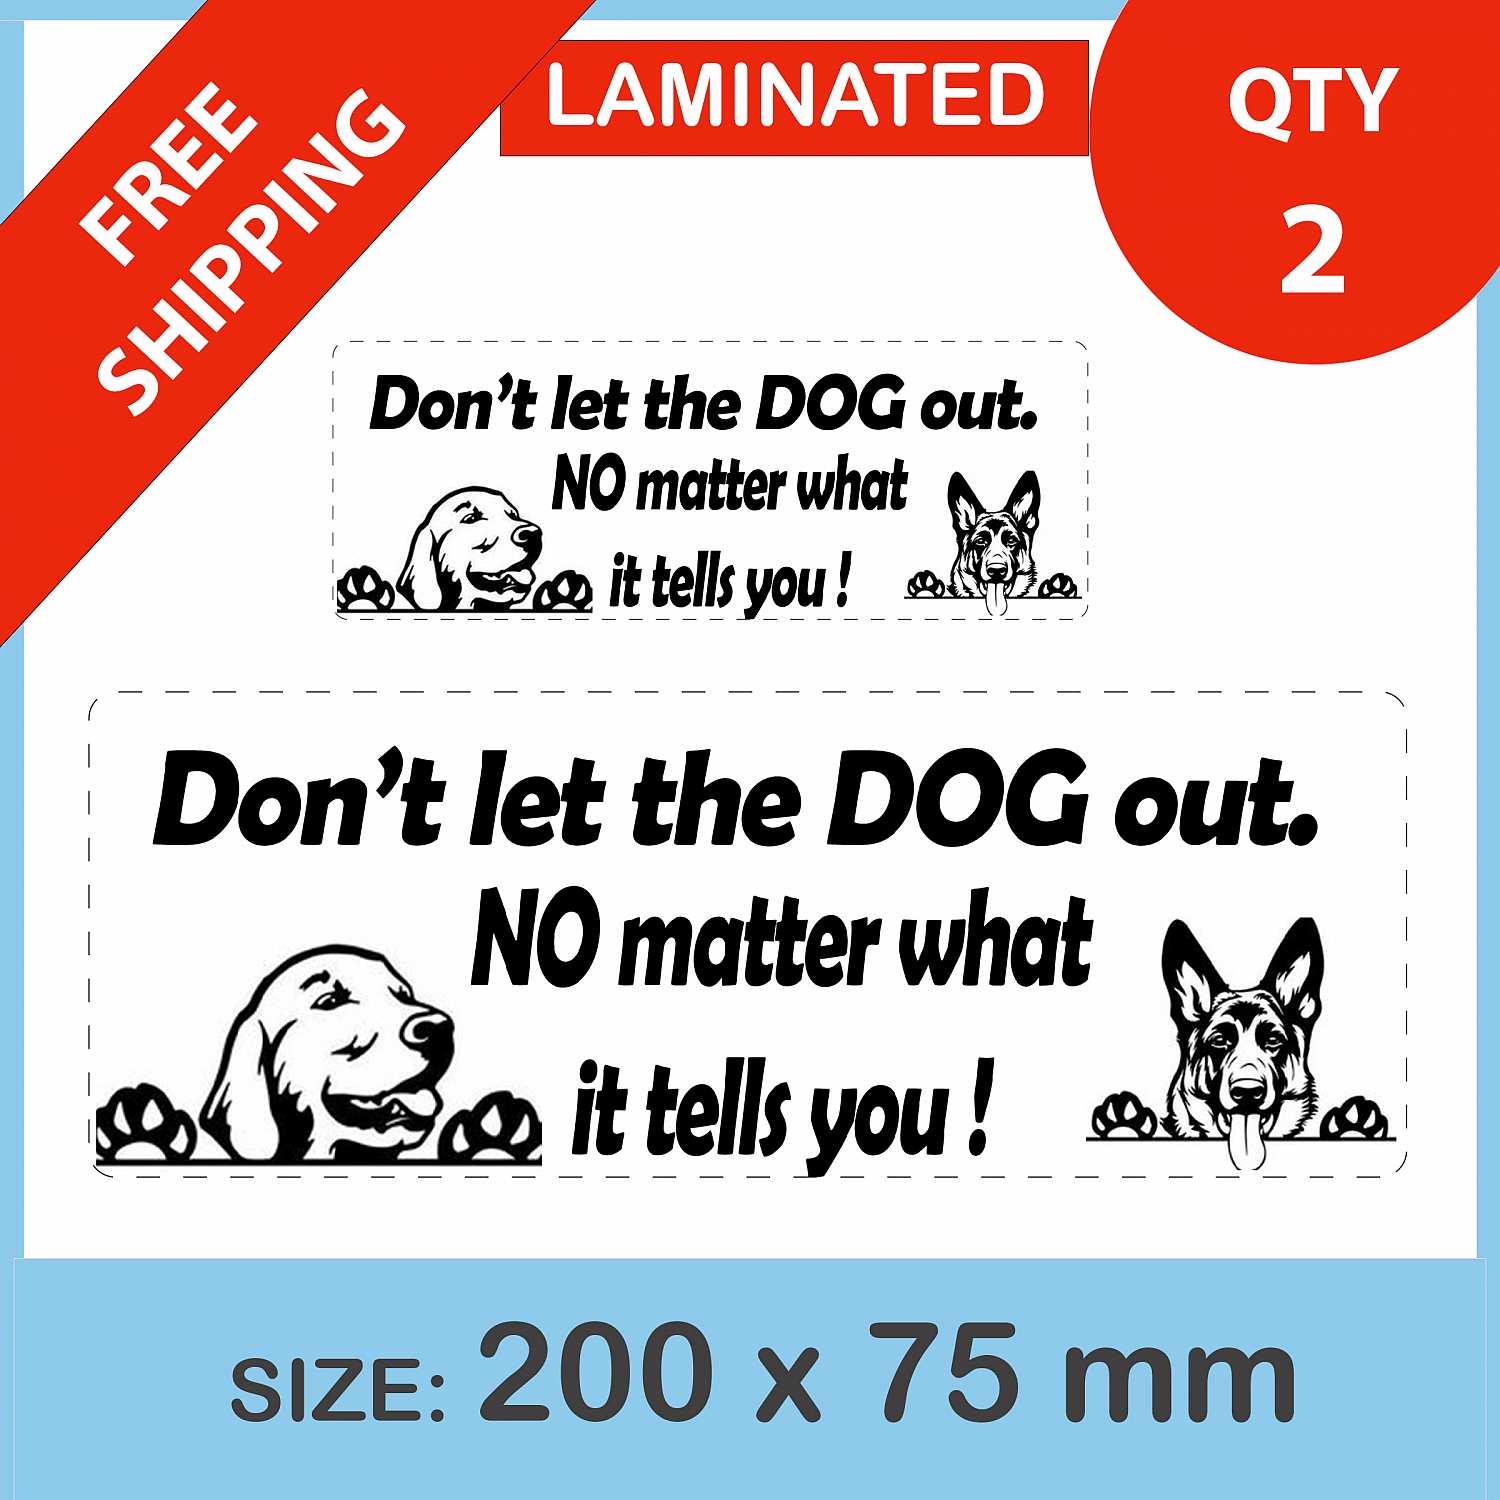 Dont let dog out QTY 2, DECAL STICKER (LAMINATED) Die Cut for Car ,Ute, Caravan | dont_let_dog_out_for_listing_v3.jpg